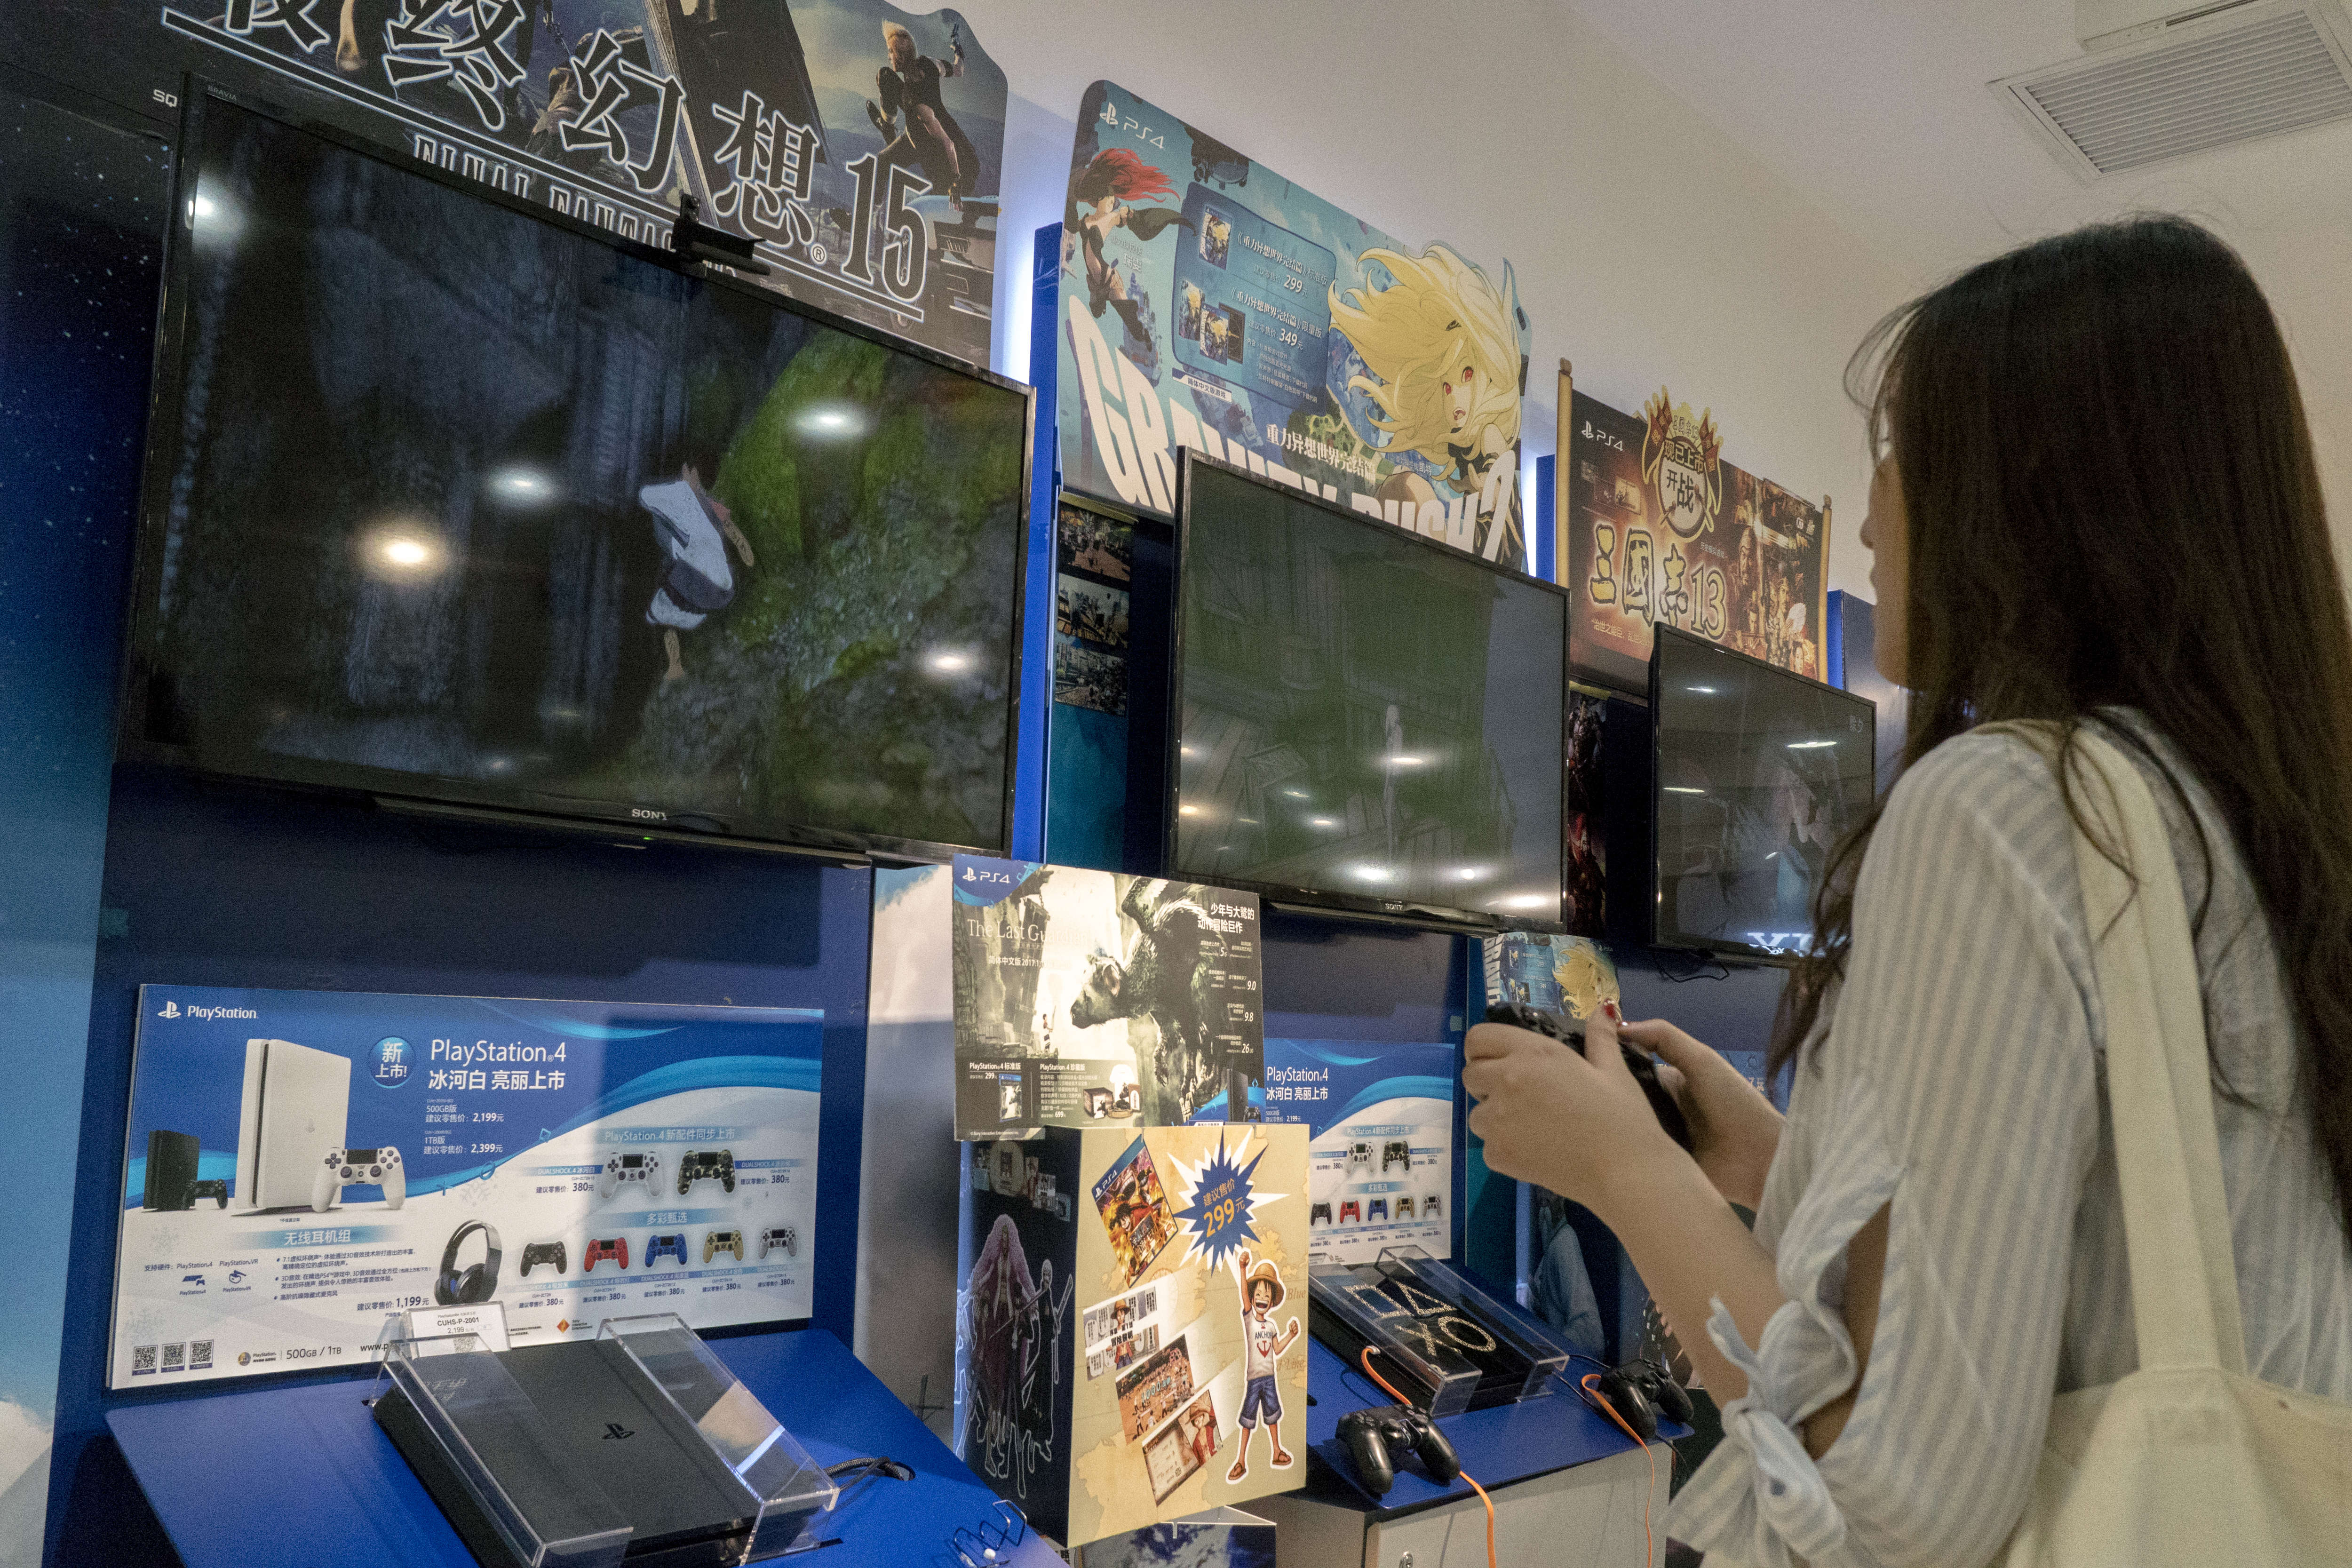 A young girl is experiencing PlayStation 4 in a Sony store...